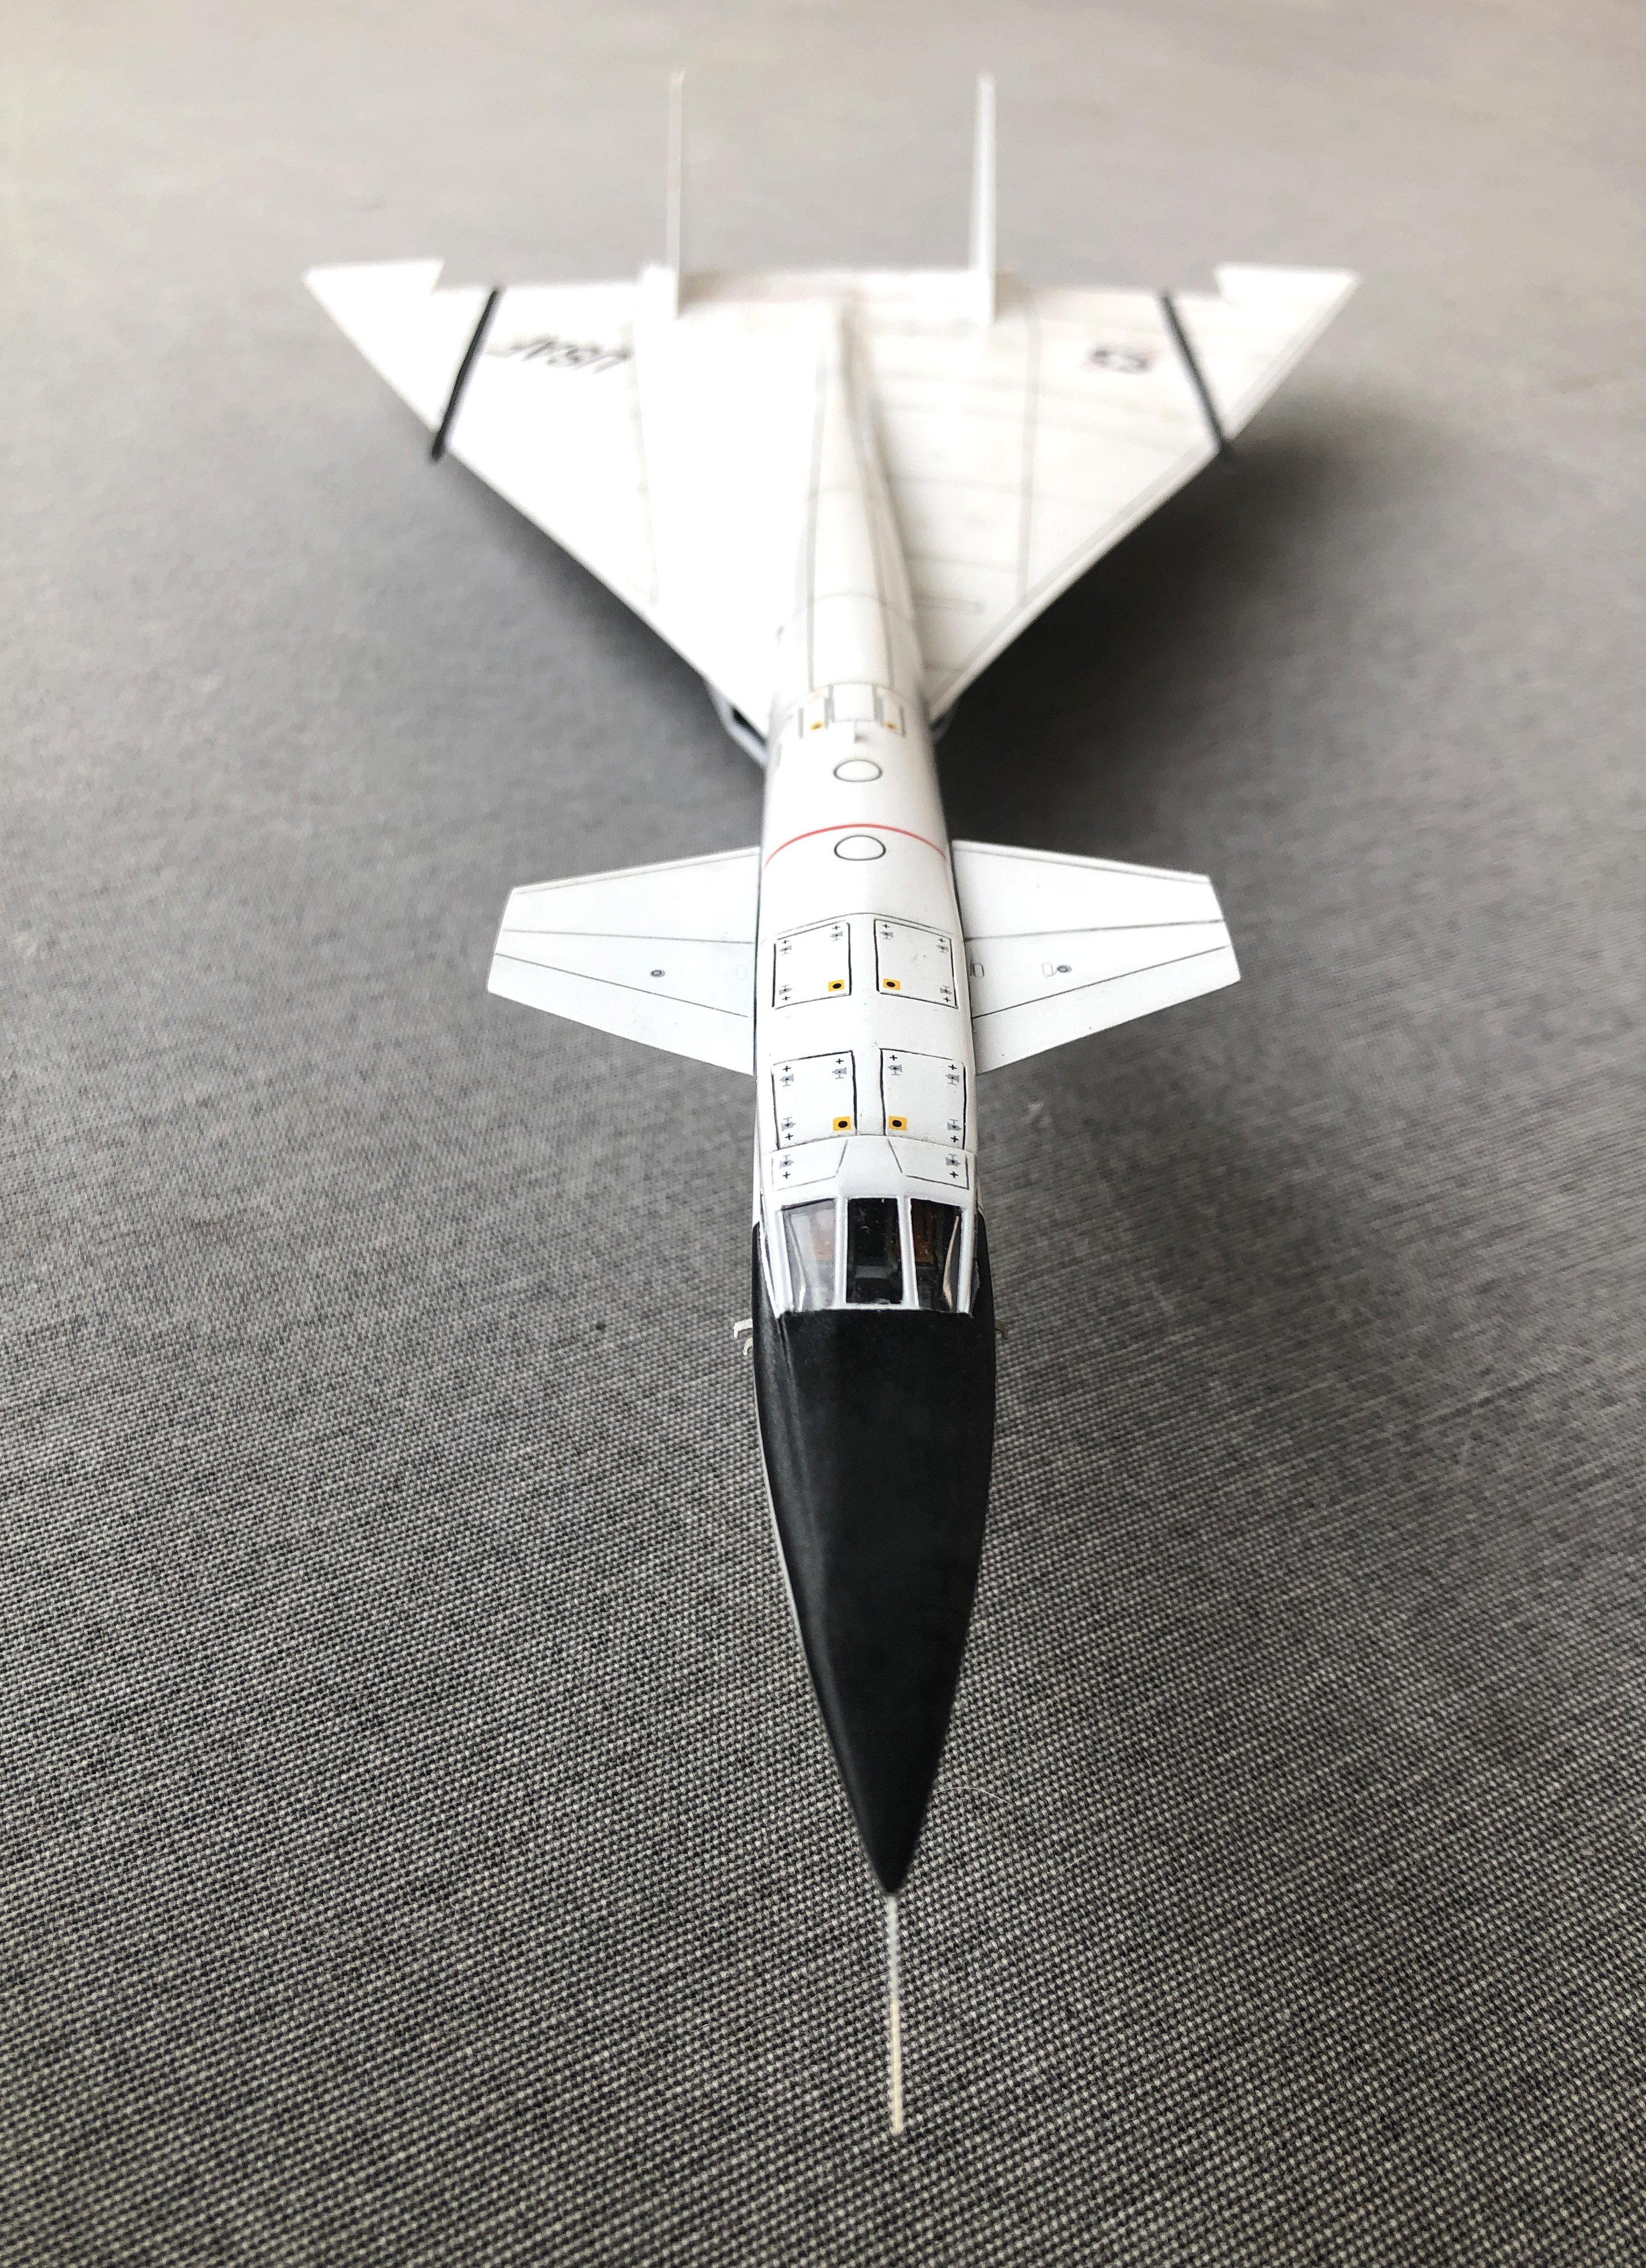 [ARMORY] North American XB-70 Valkyrie  1/144 Md52